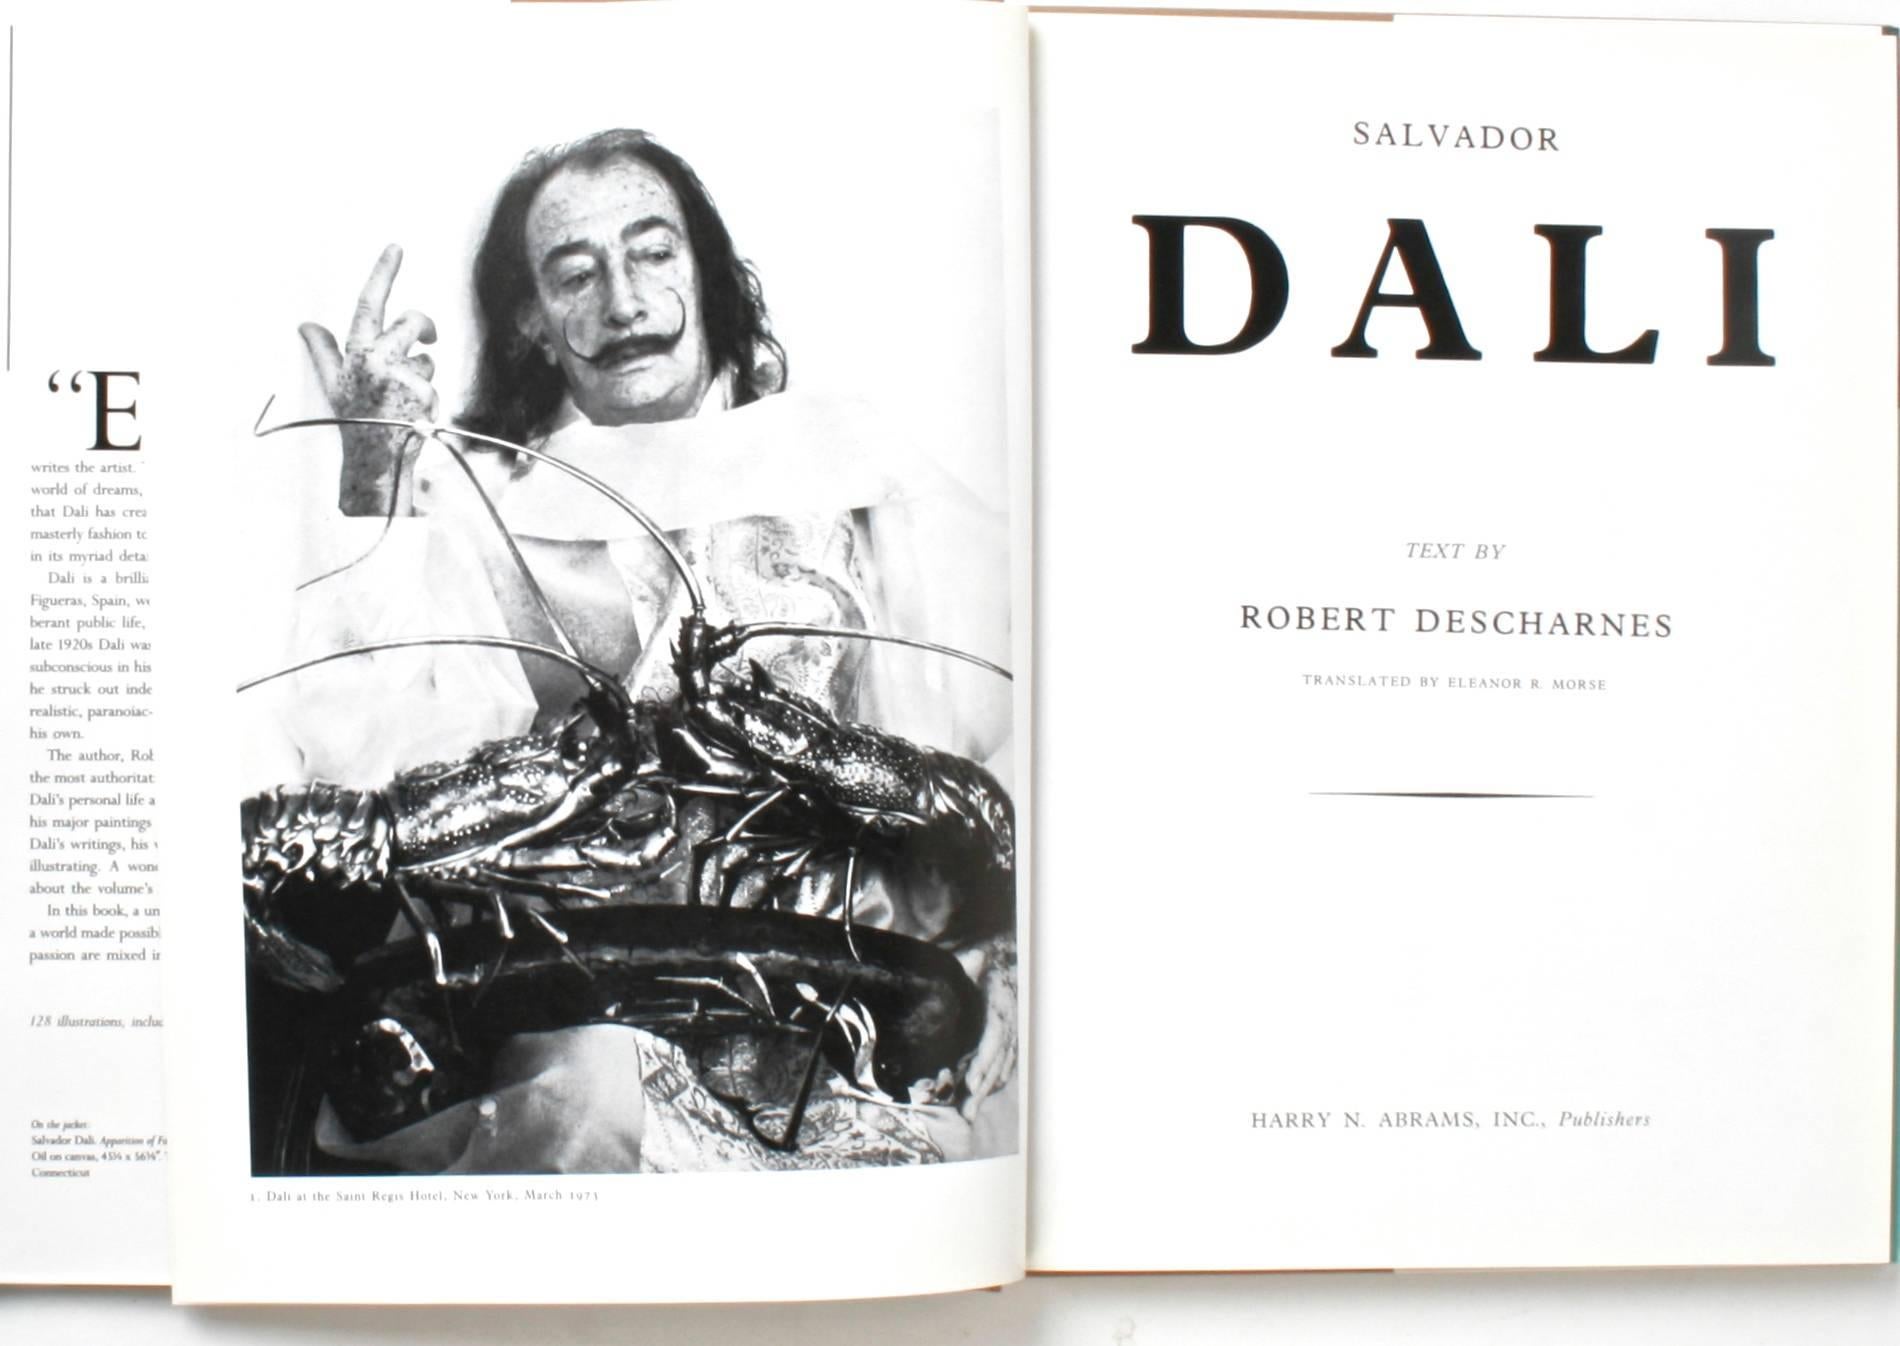 Dali by Robert Descharnes. New York: Harry N. Abrams, Inc., 1985 Reprinted first edition hardcover with dust jacket. 127 pp. An art book on Salvador Dali which leads us through the dreams, hallucinations, phantasms, and fractured reality that he